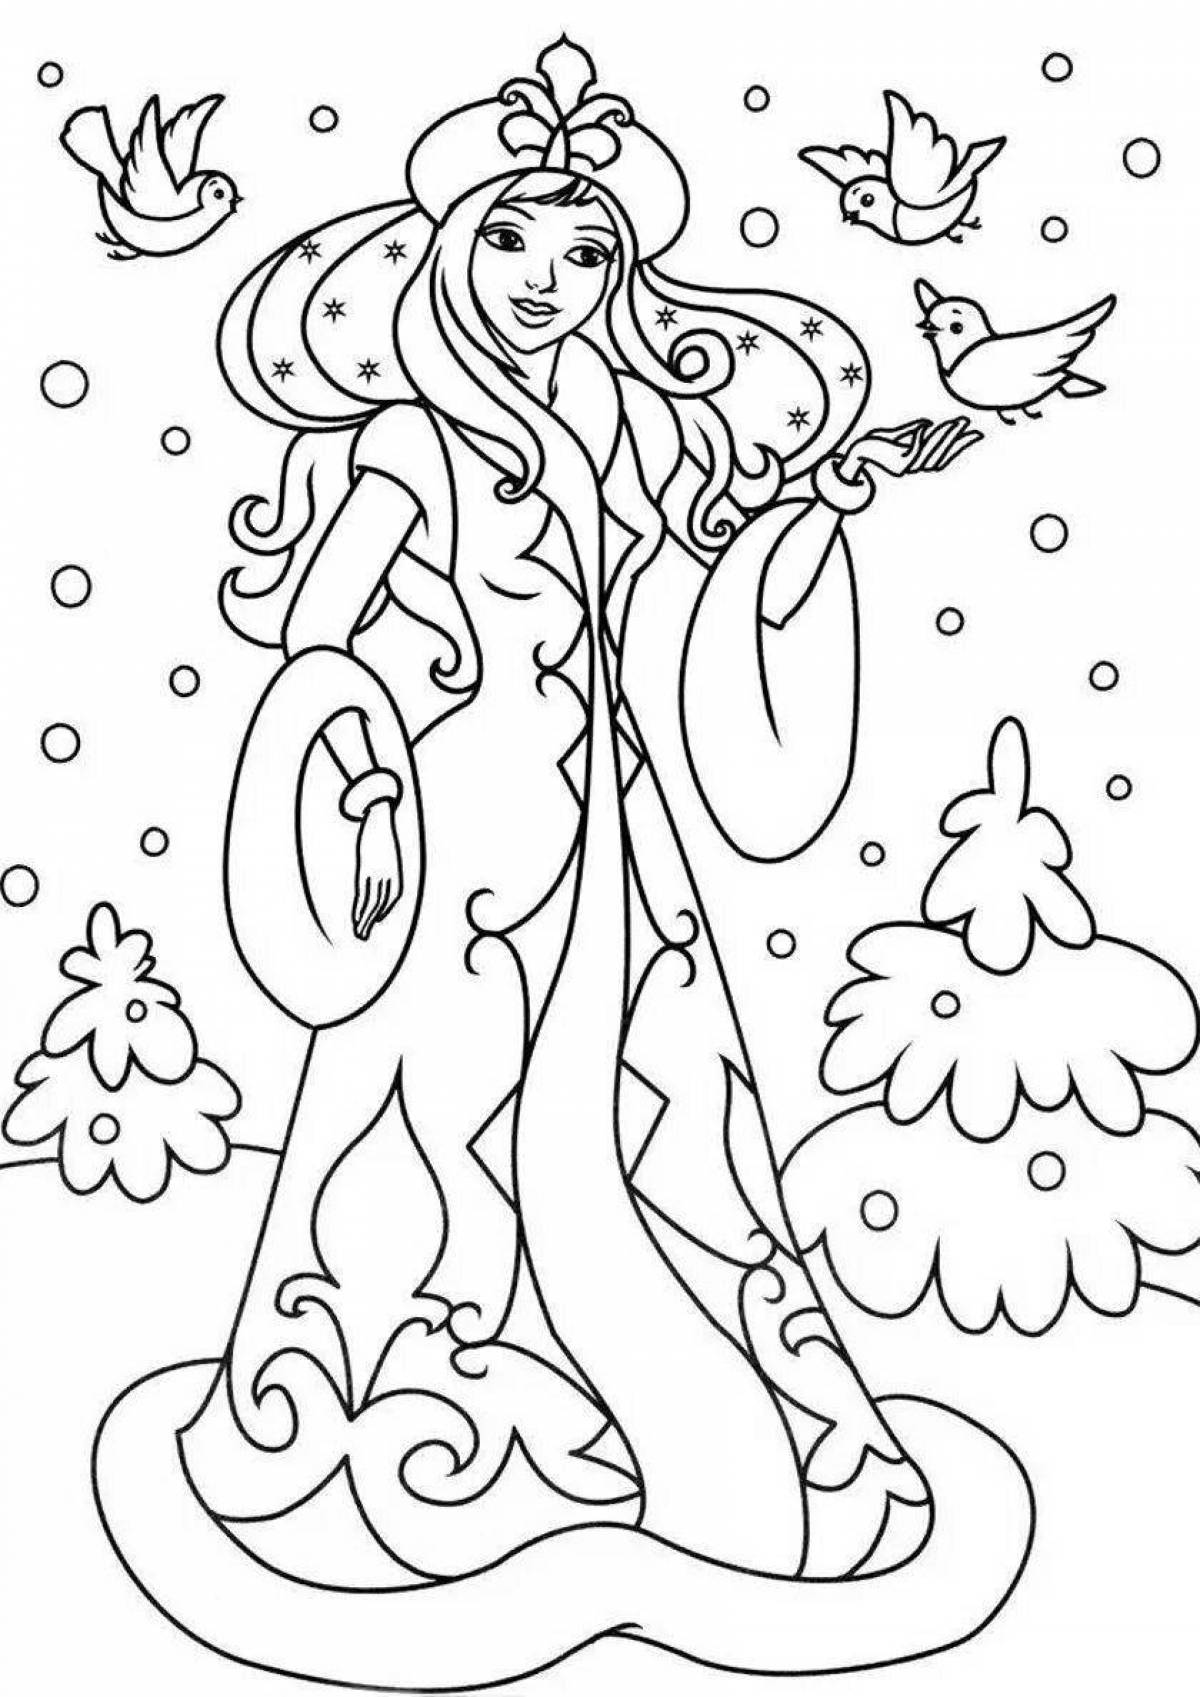 Coloring book of a violent snow maiden